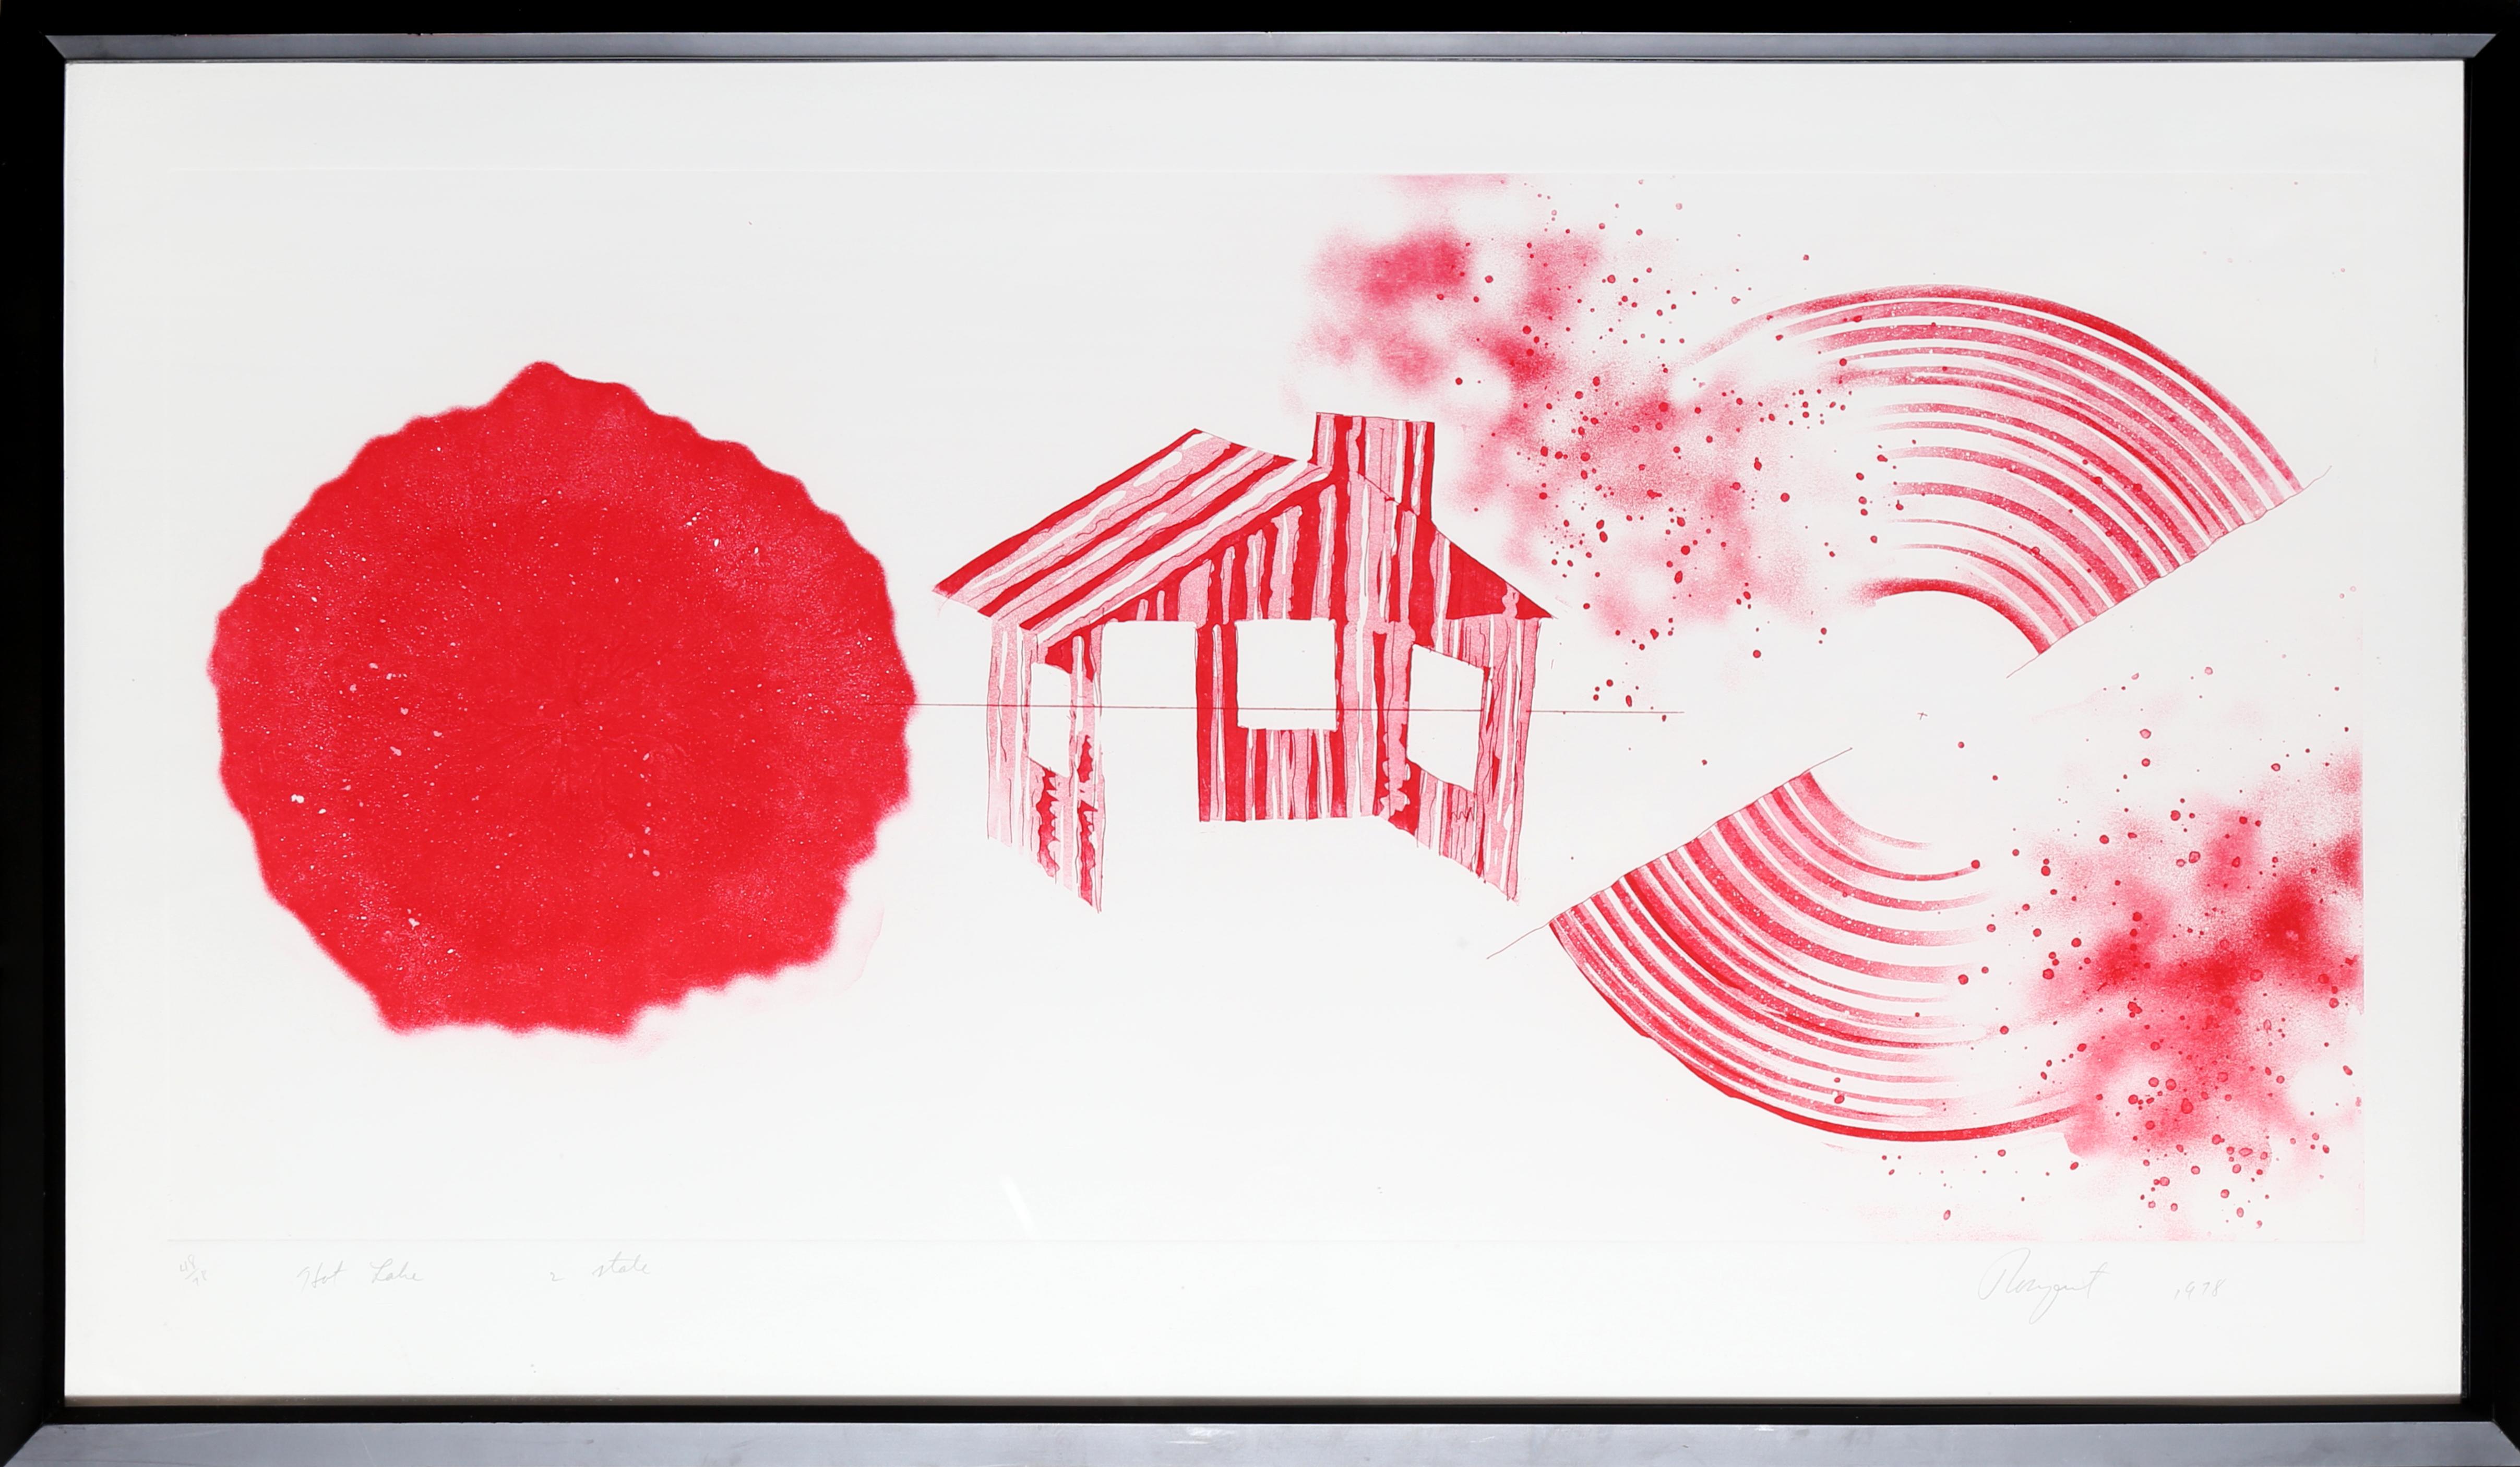 Artist: James Rosenquist, American (1933 - )
Title: Hot Lake (2nd State)
Year: 1978
Medium: Aquatint Etching, Signed and numbered in pencil
Edition: 78
Size: 23 in. x 40 in. (58.42 cm x 101.6 cm)

Printer: Aripeka Ltd.
Publisher: Multiples